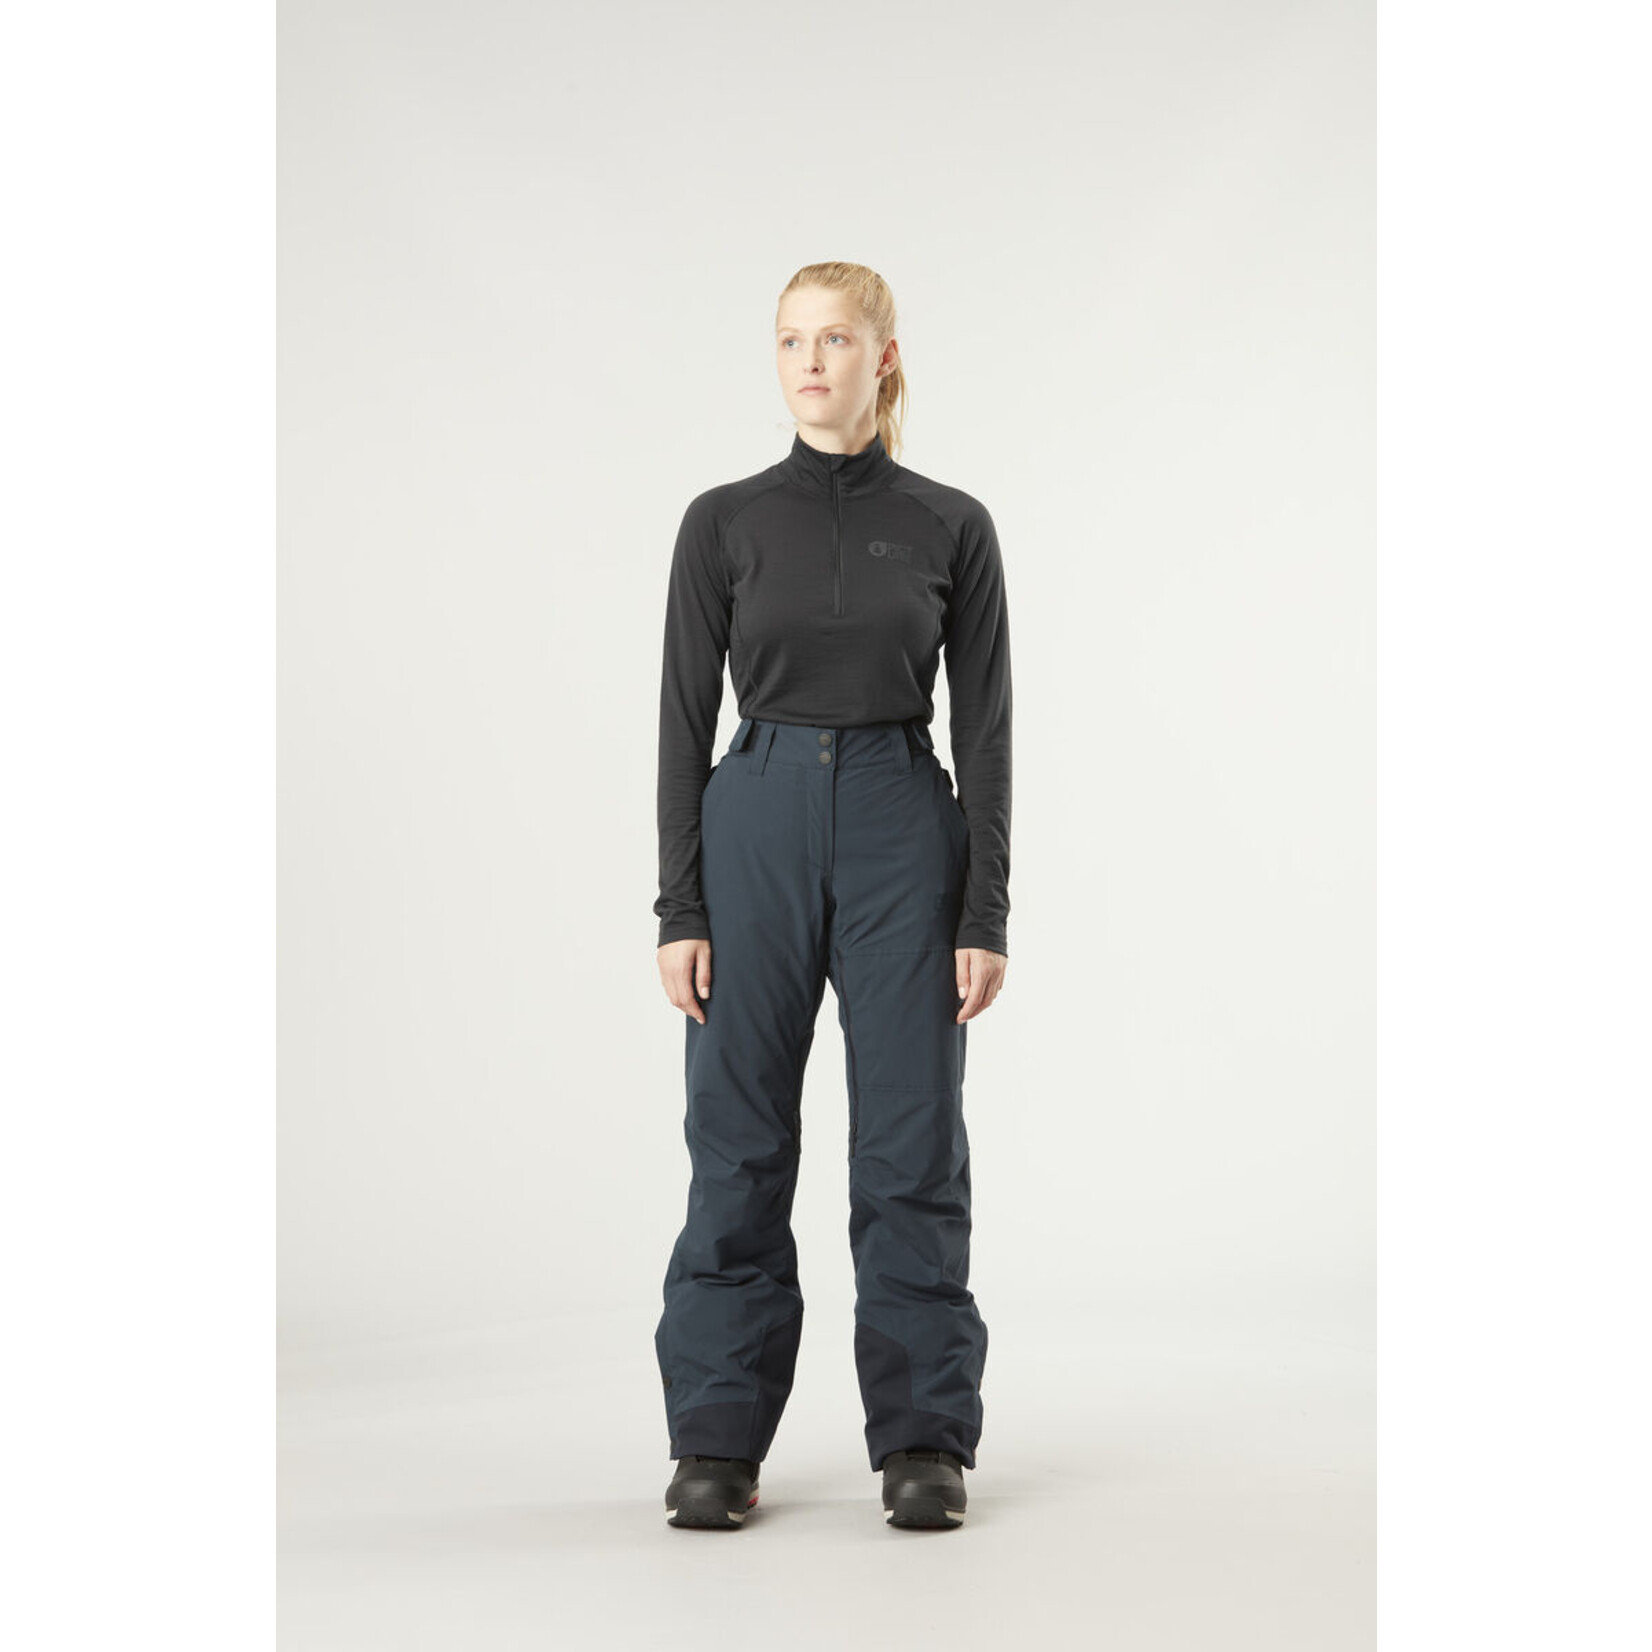 Picture Organic Picture Organic Women's Hermiance Pants